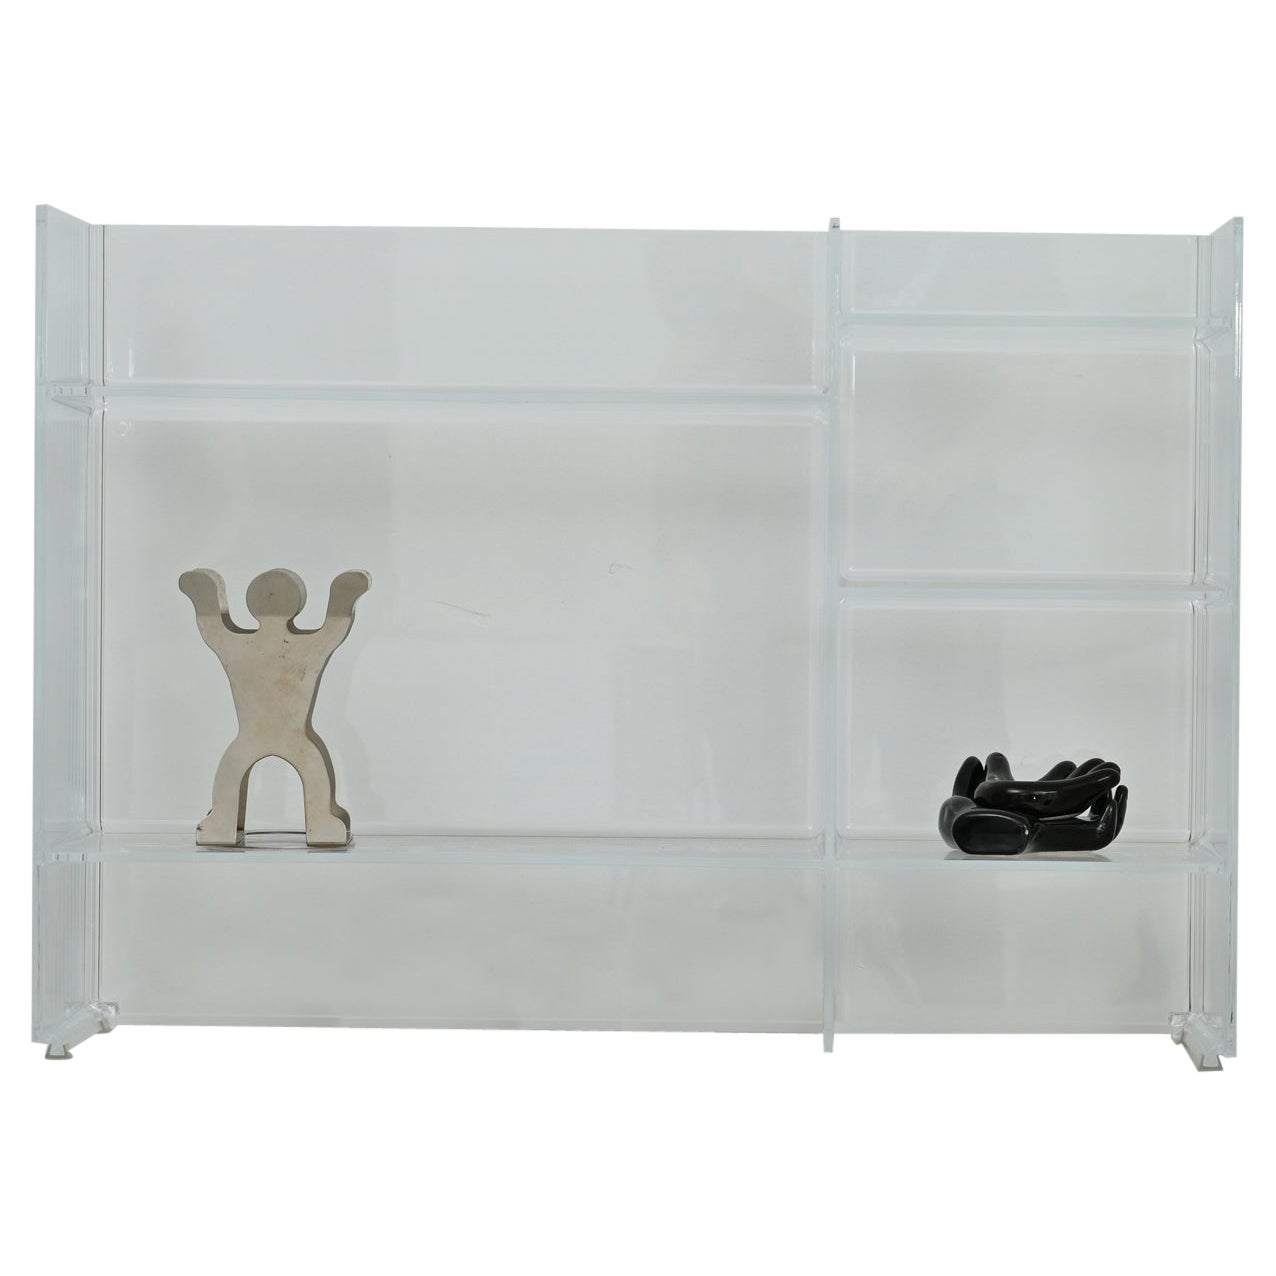 Clear Acrylic New-In-Box “Sound Rack” by Ludovica & Roberto Palomba for Kartell For Sale